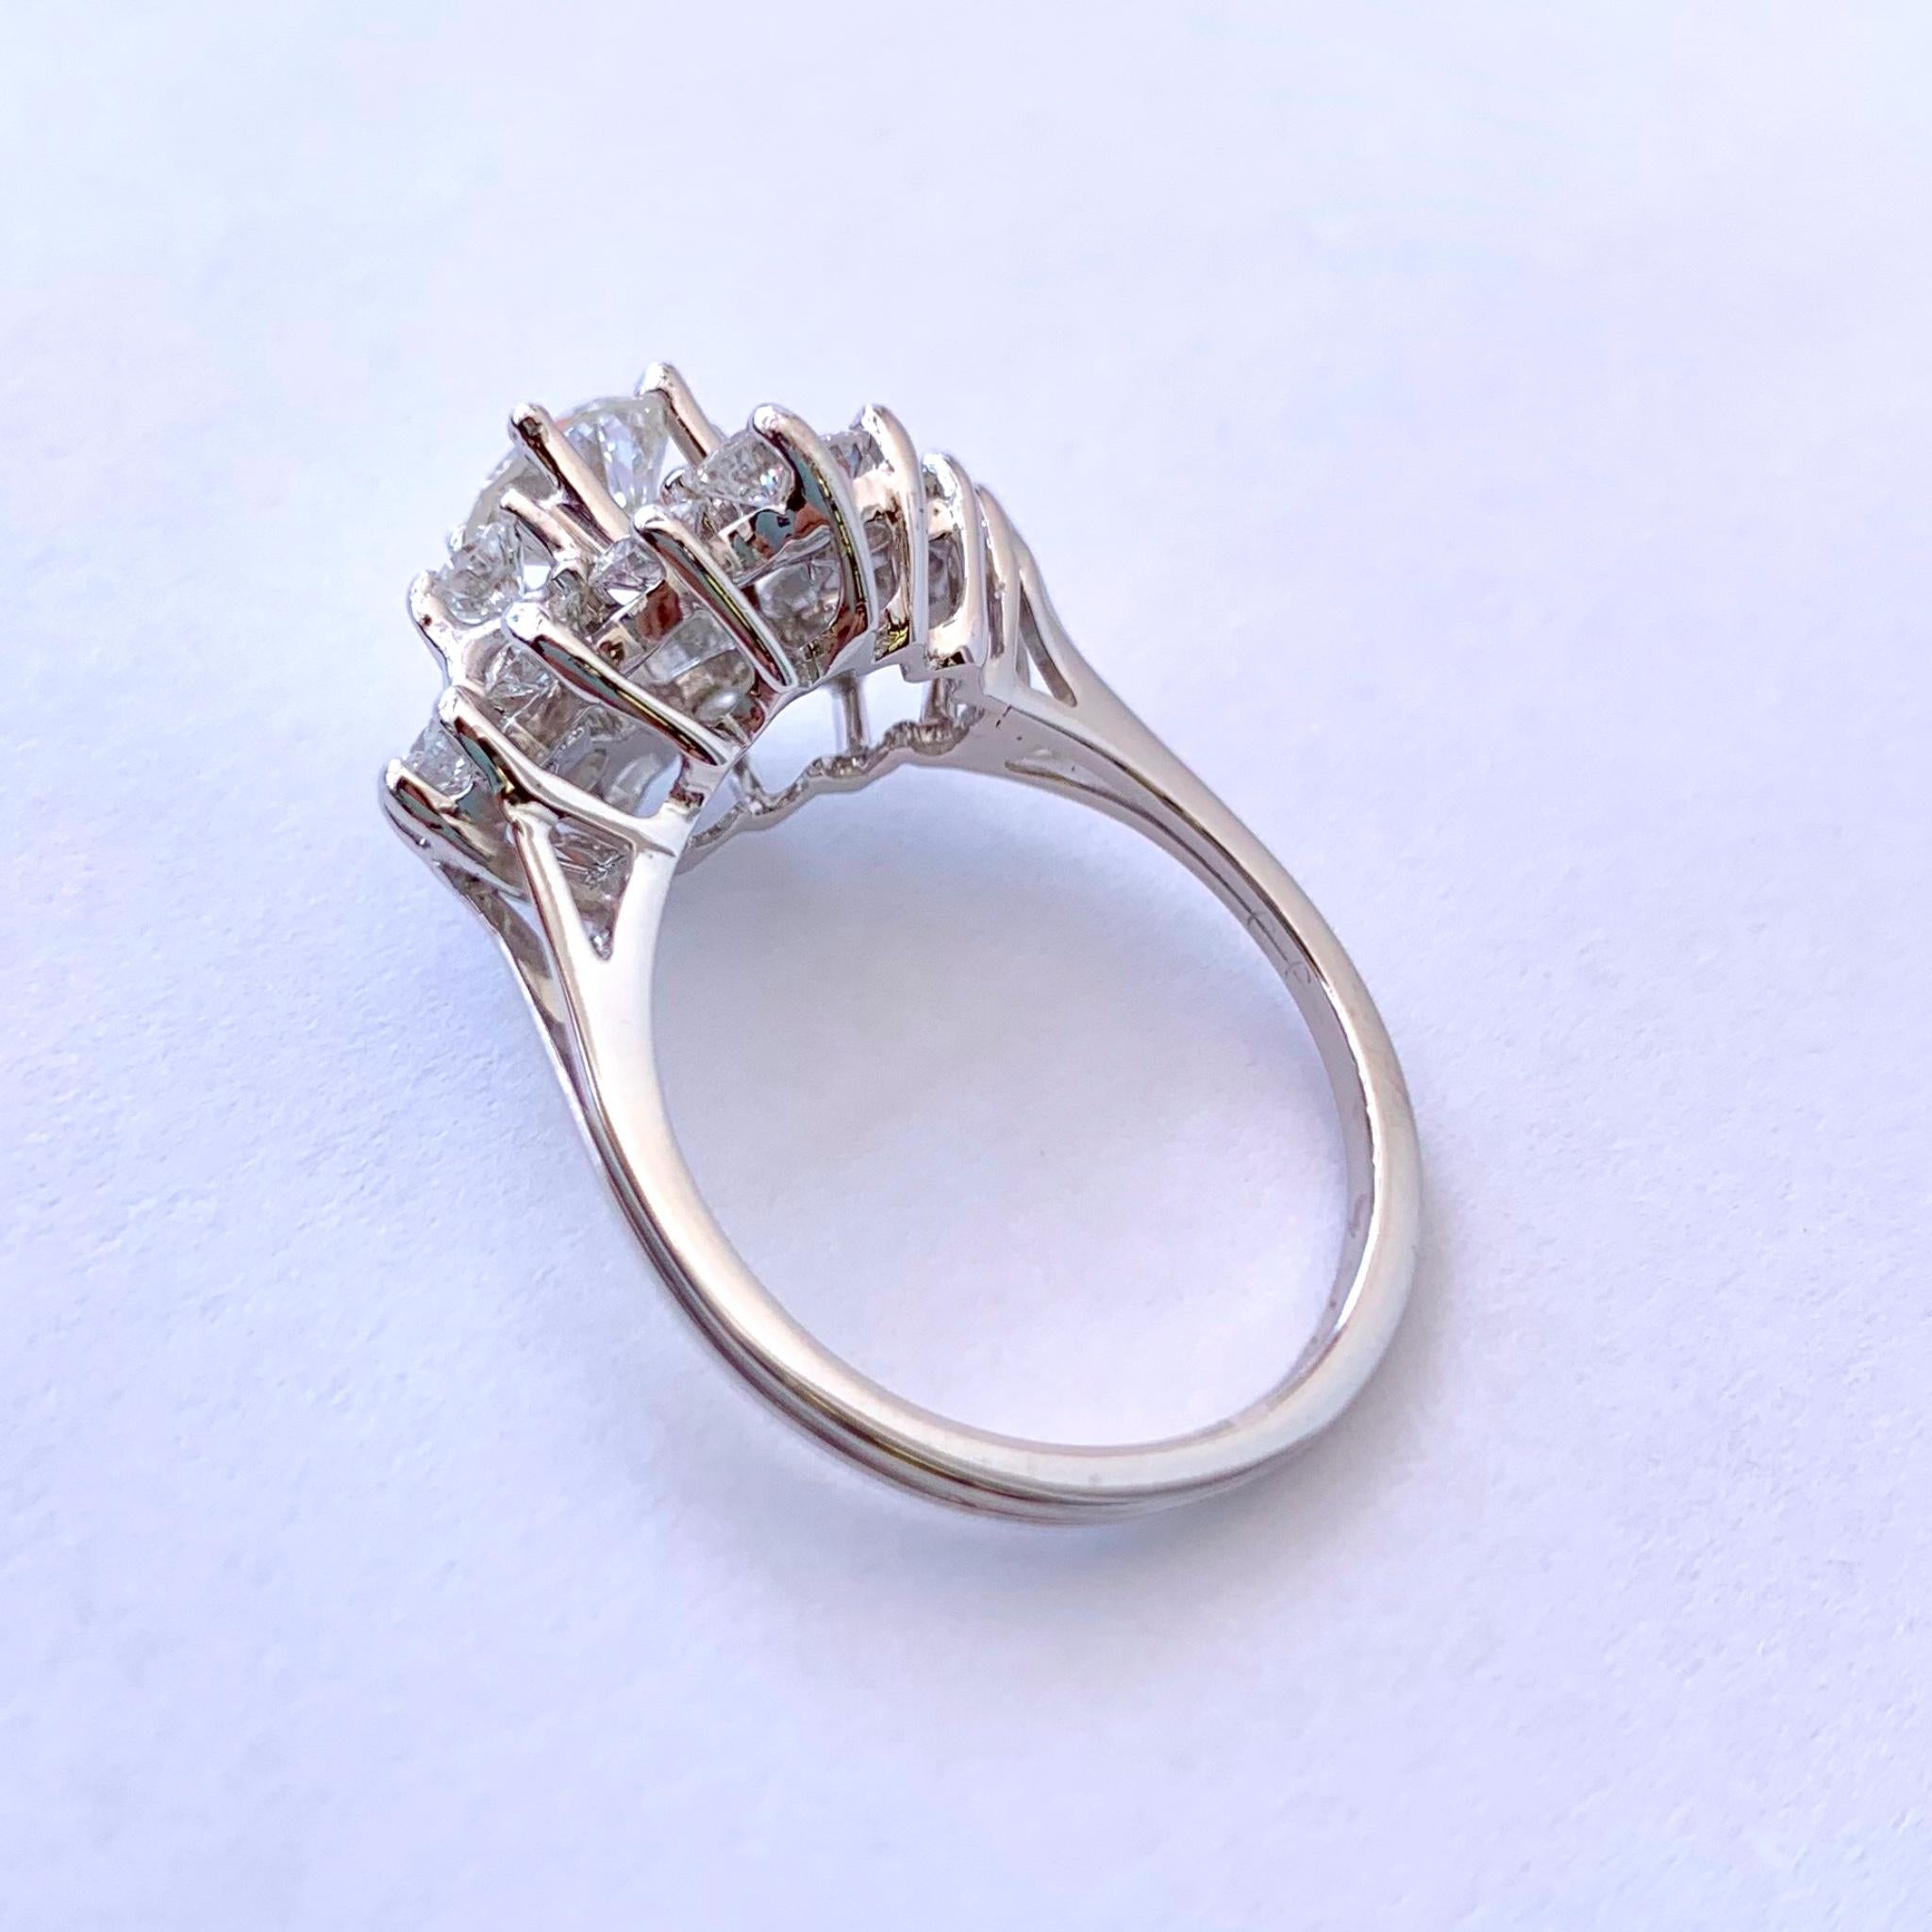 Contemporary Vintage 14 Karat White Gold Diamond Cocktail Ring 1970s For Sale